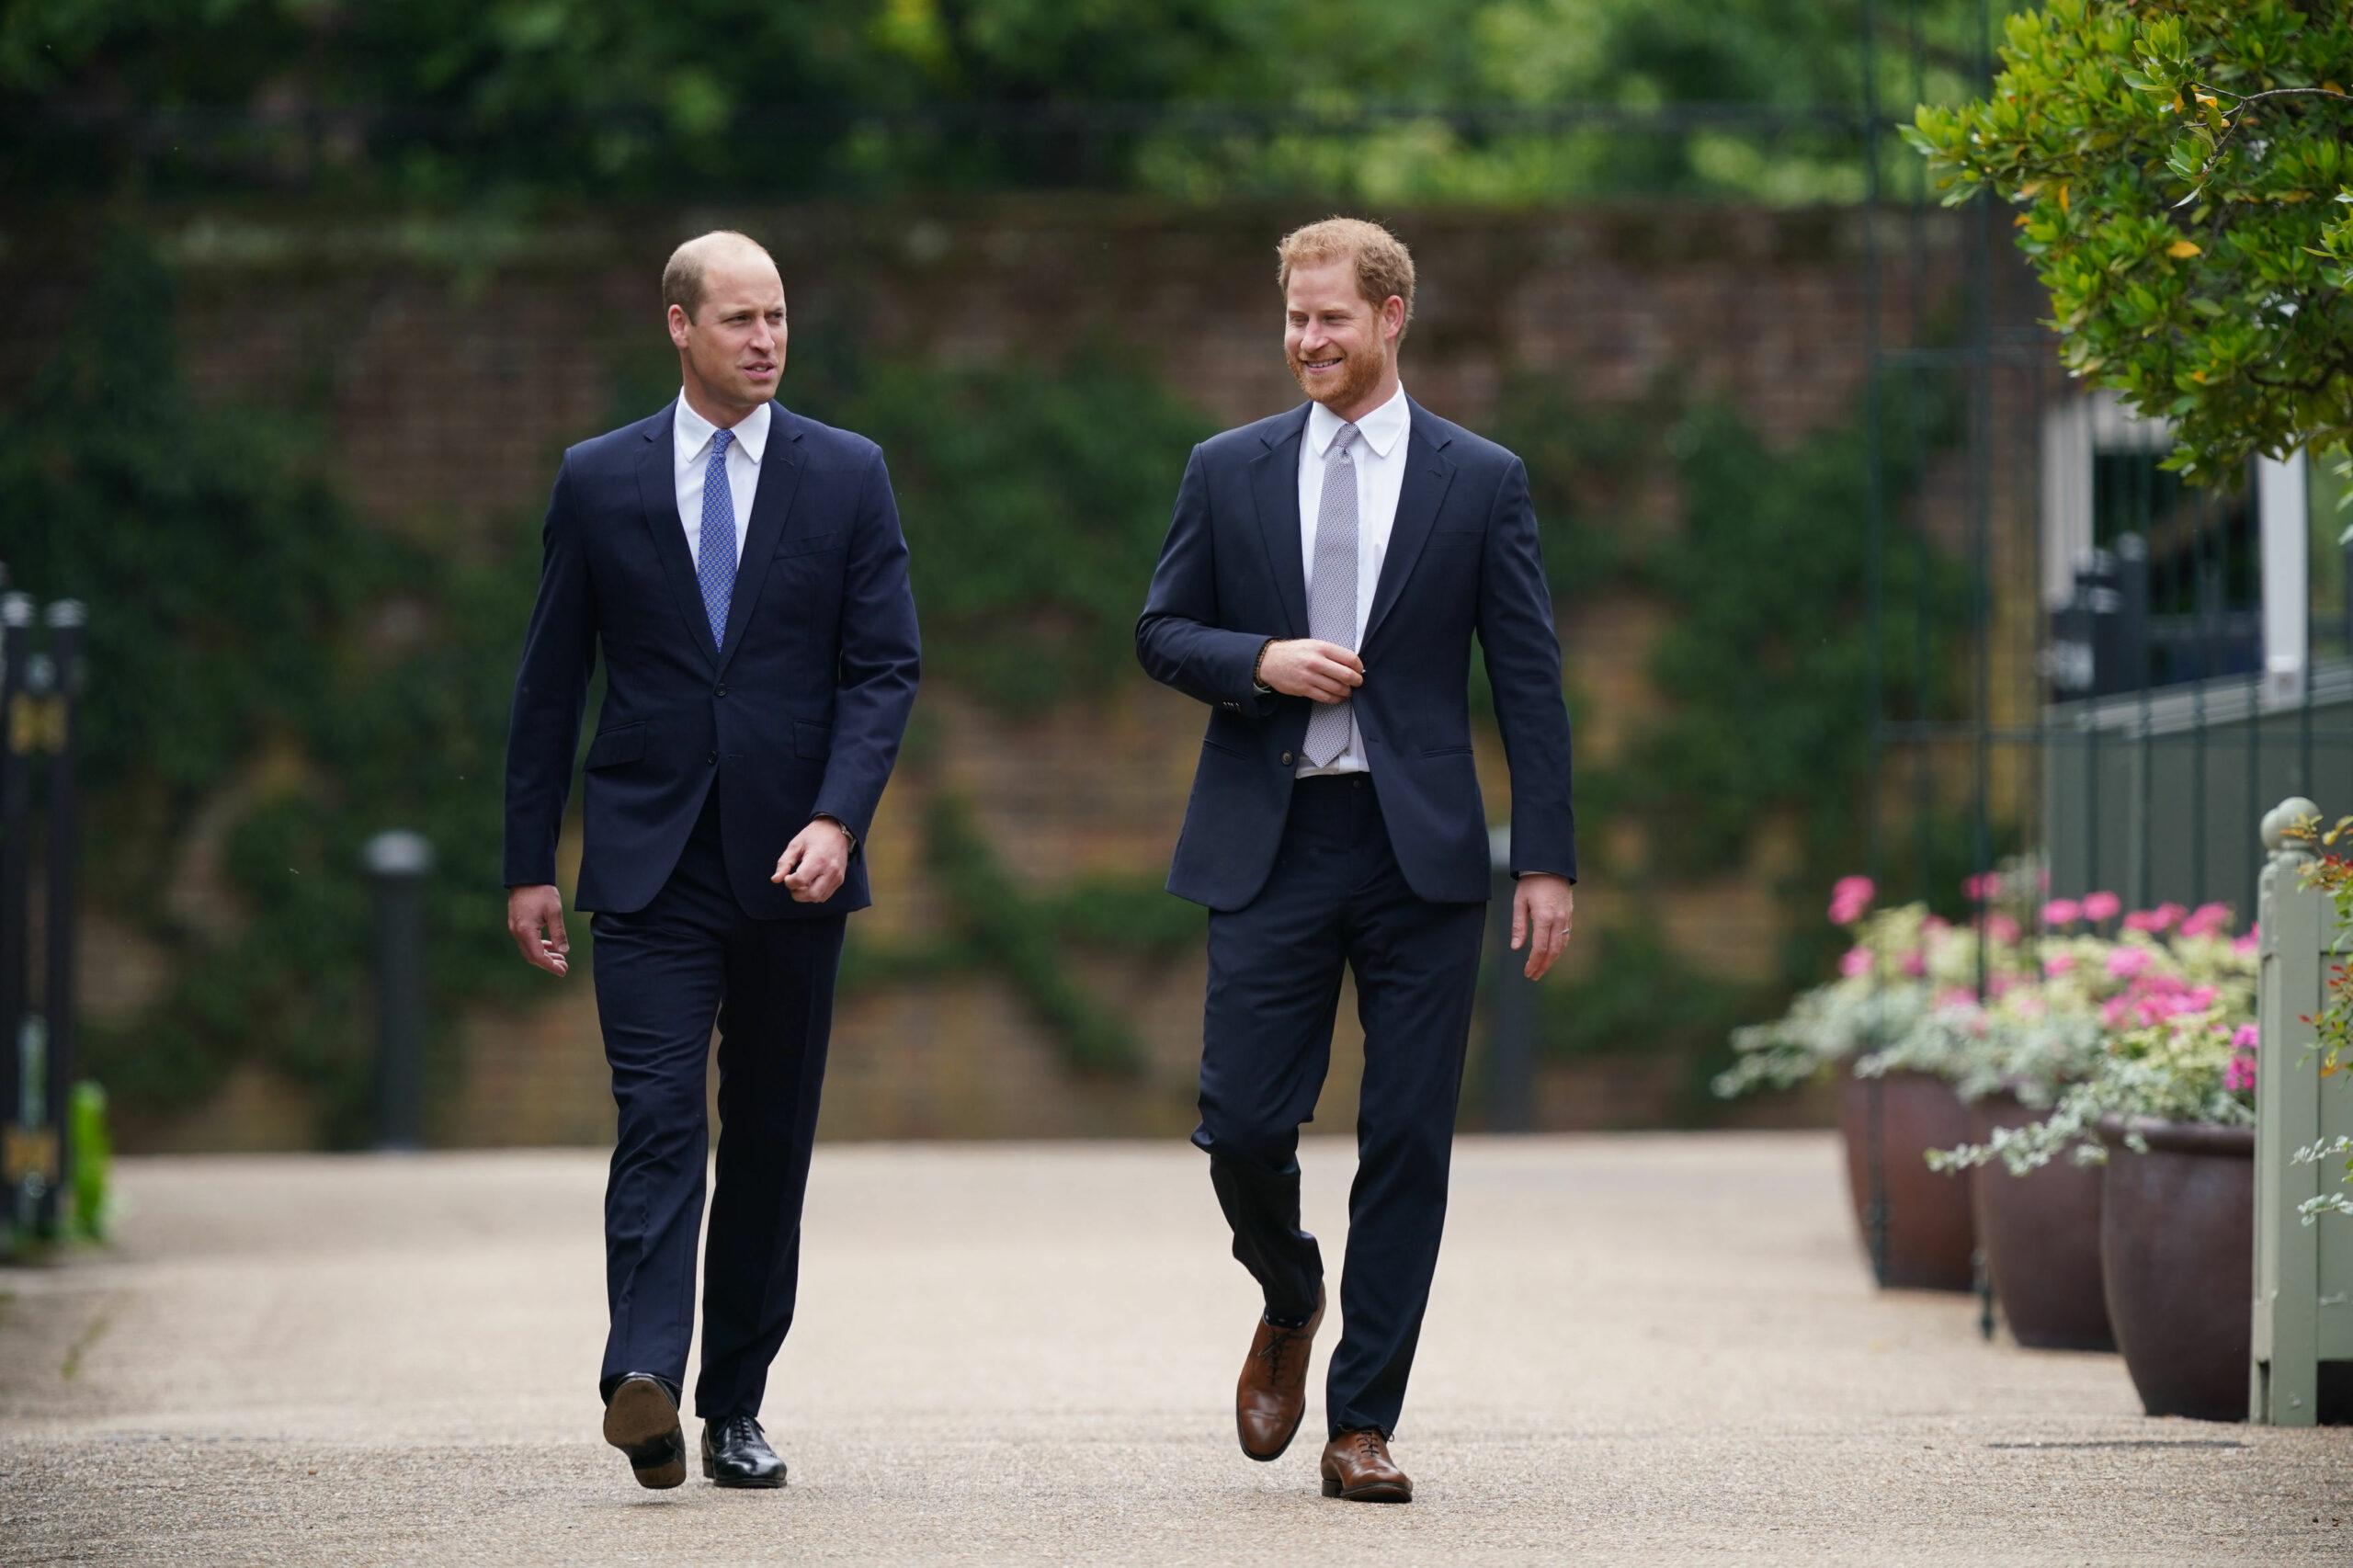 Prince William, Duke of Cambridge and Prince Harry, Duke of Sussex 